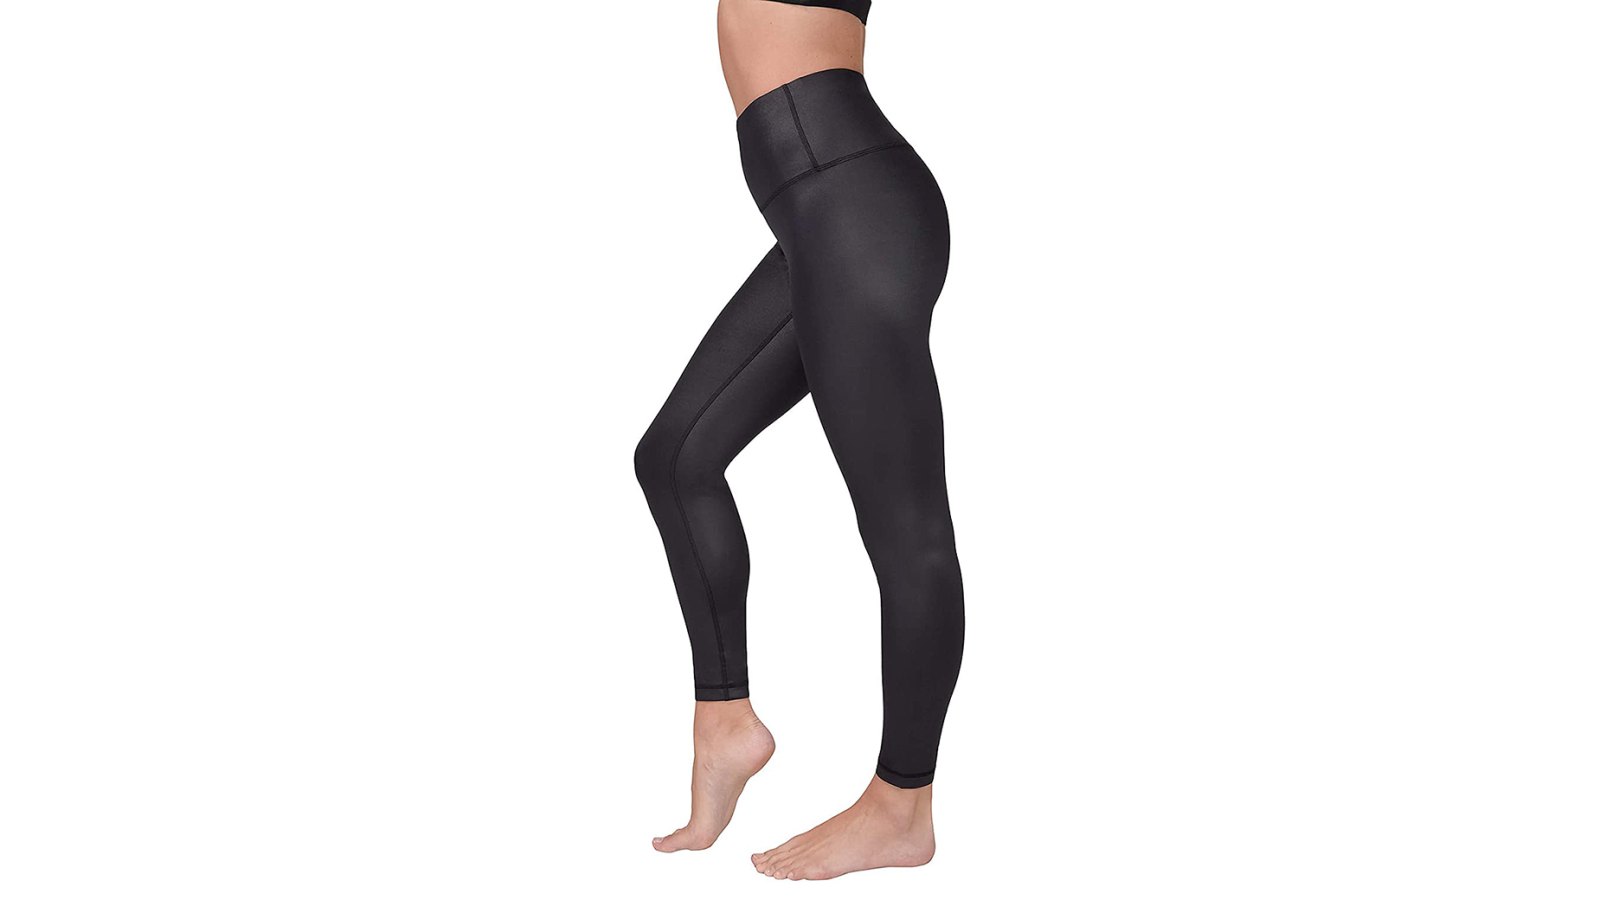 90 Degree By Reflex Leggings Are an Alternative to SPANX